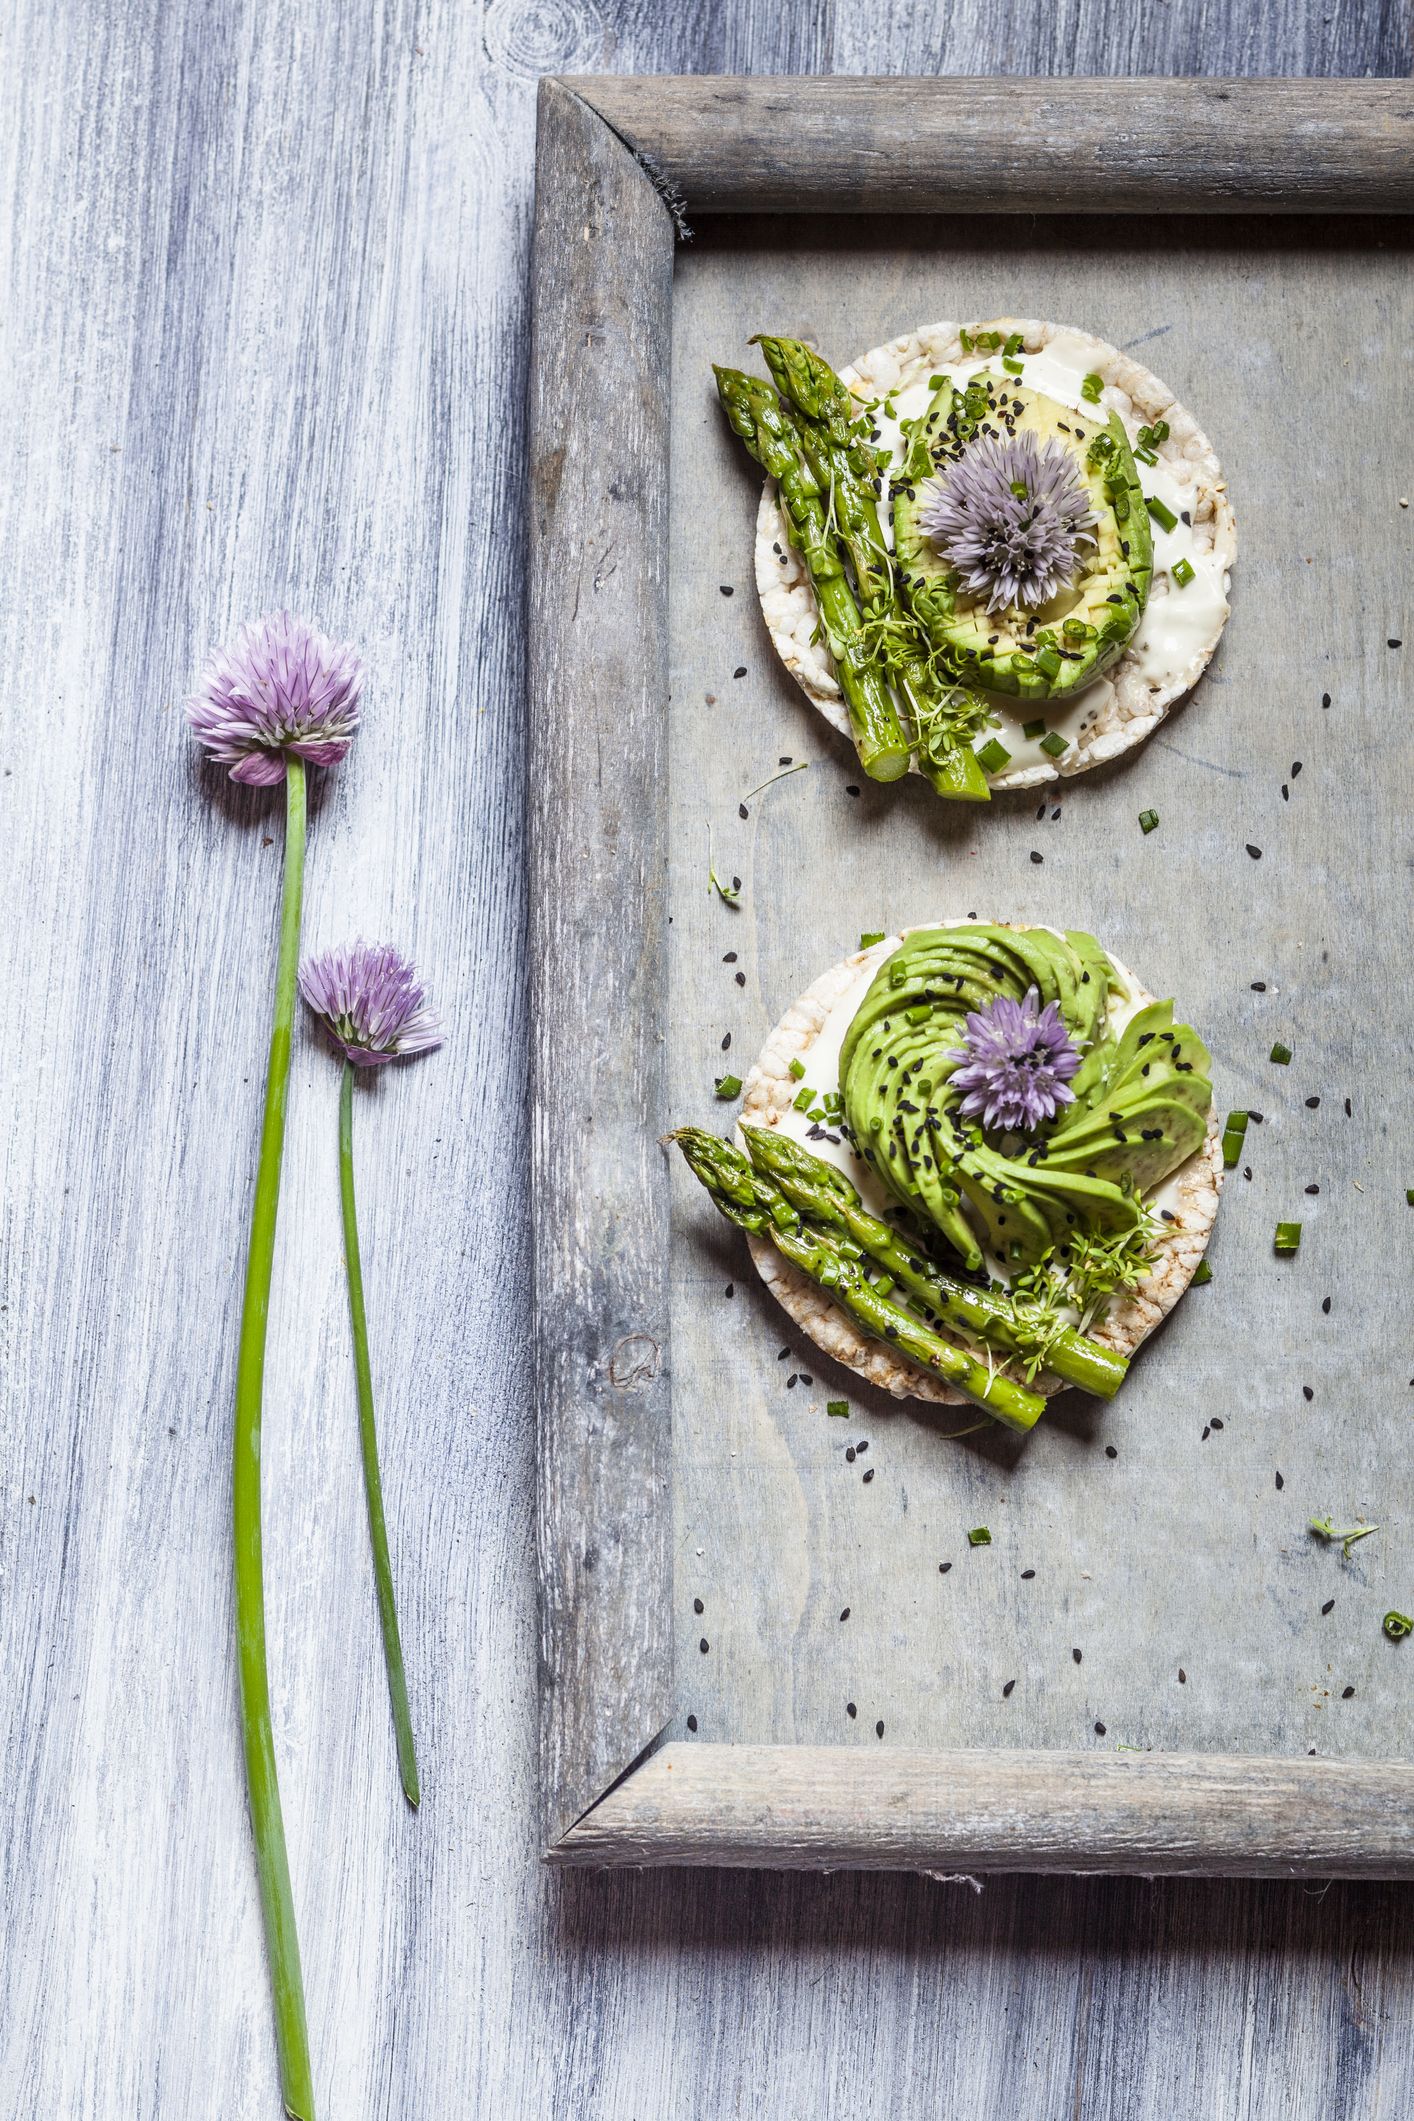 Best Edible Flowers - How to Cook with Pretty and Tasty Flowers